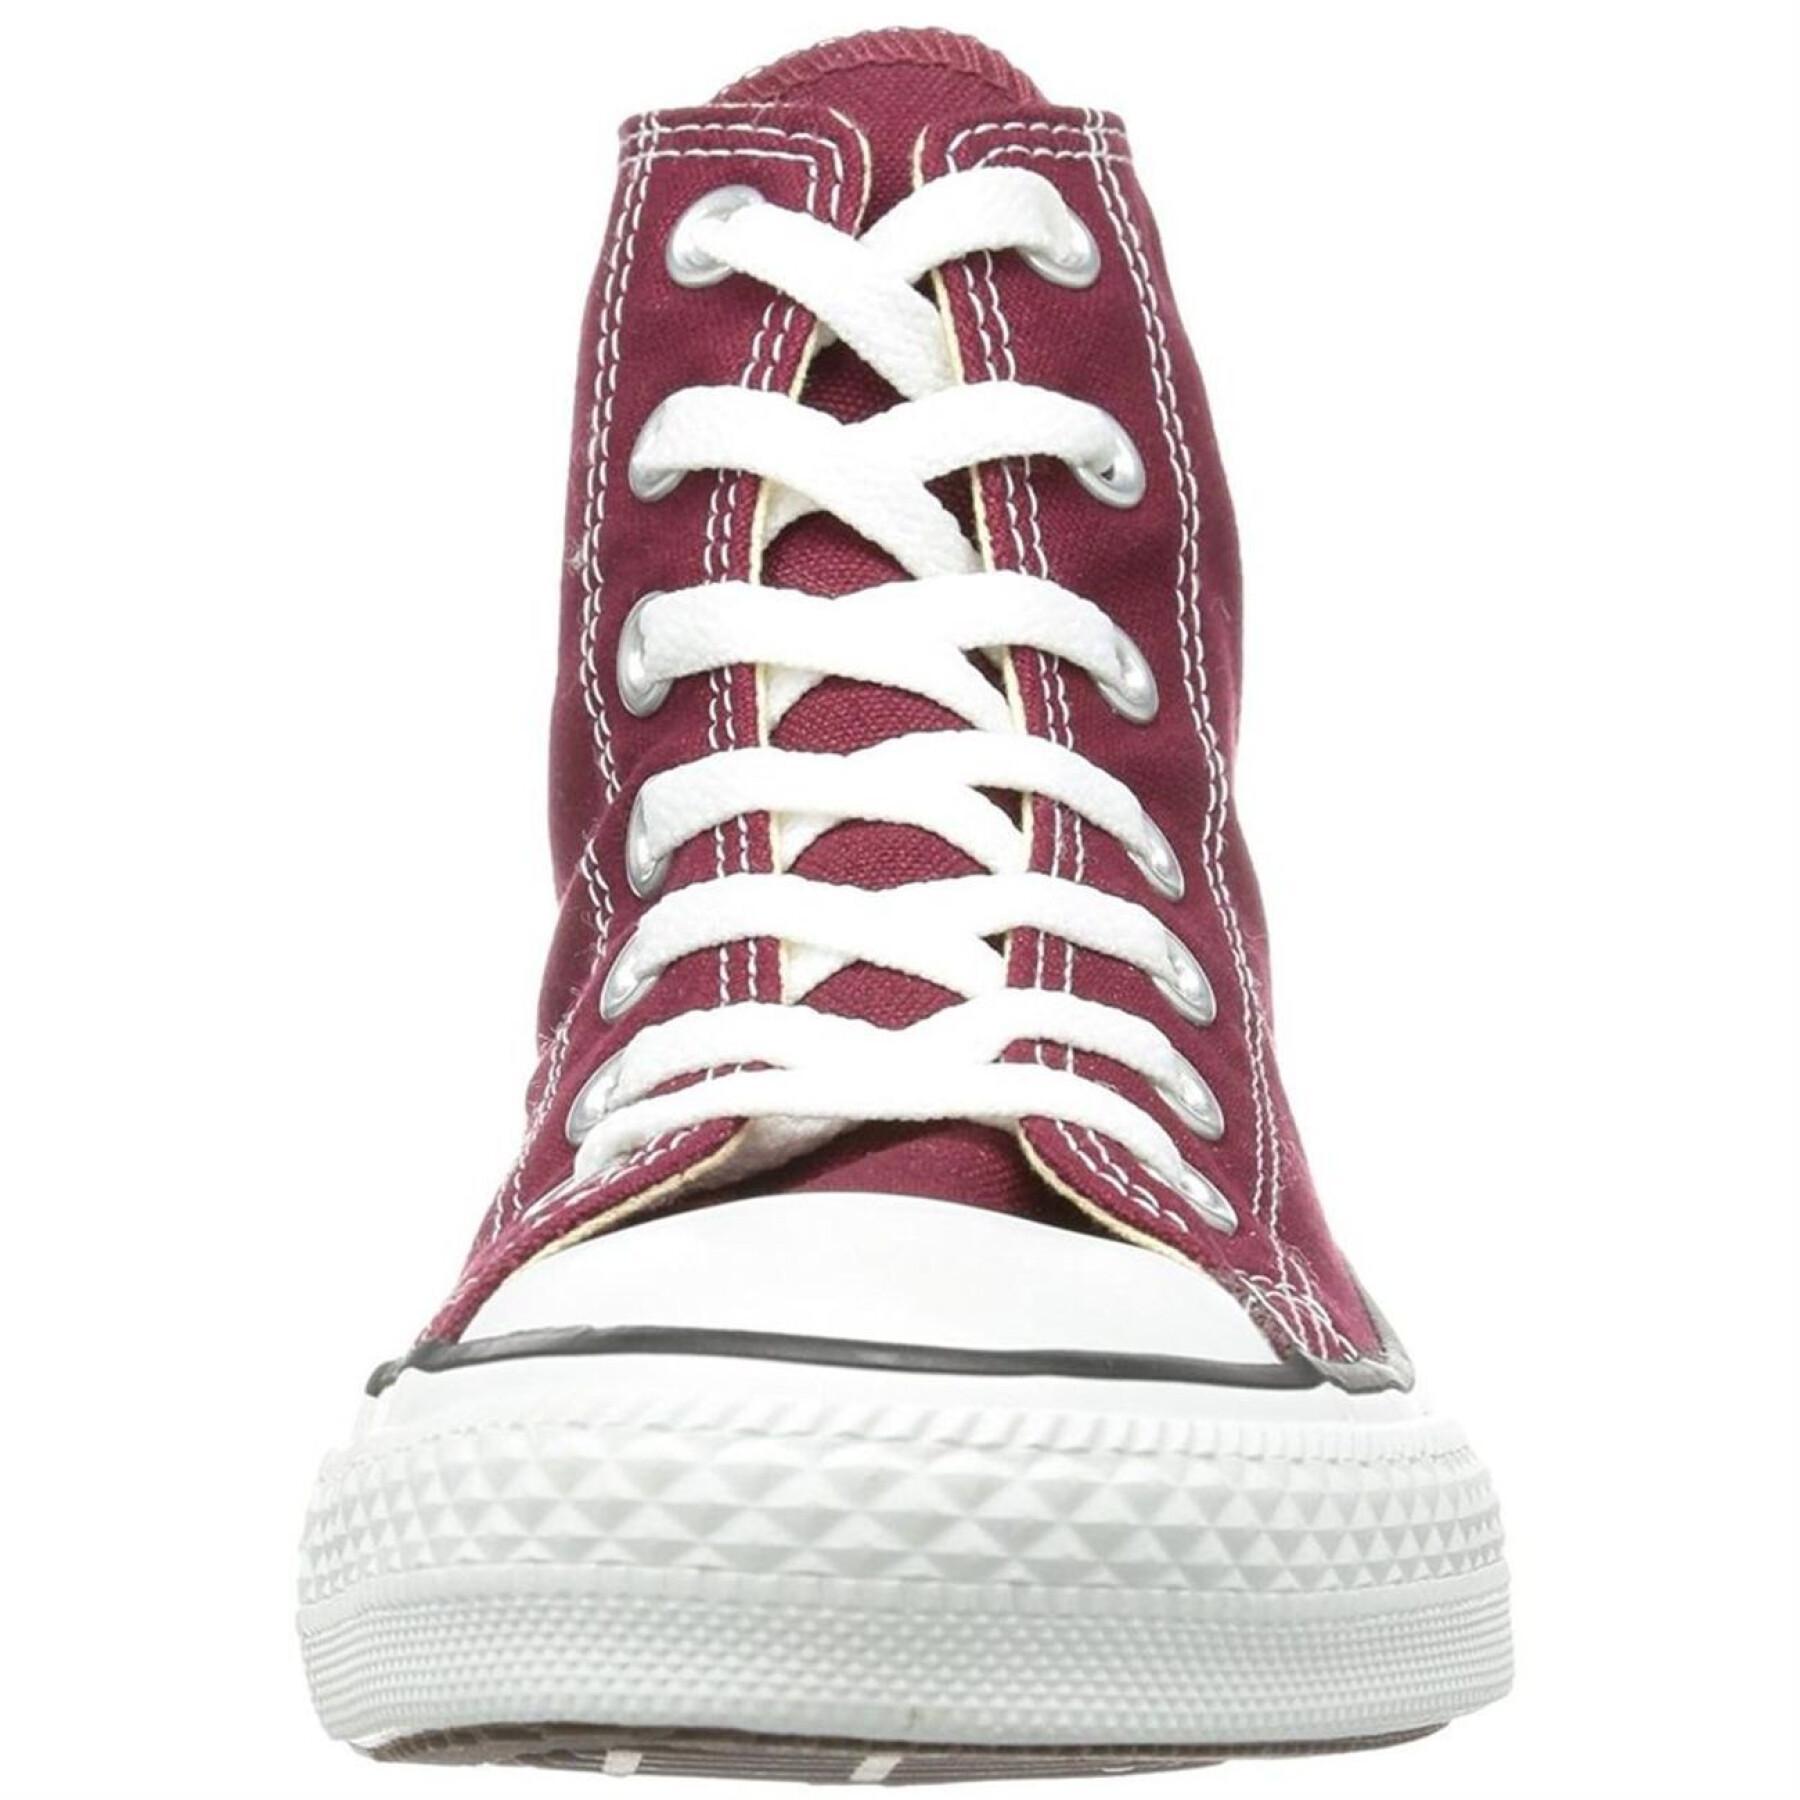 Trainers Converse Chuck Taylor All Star Hi